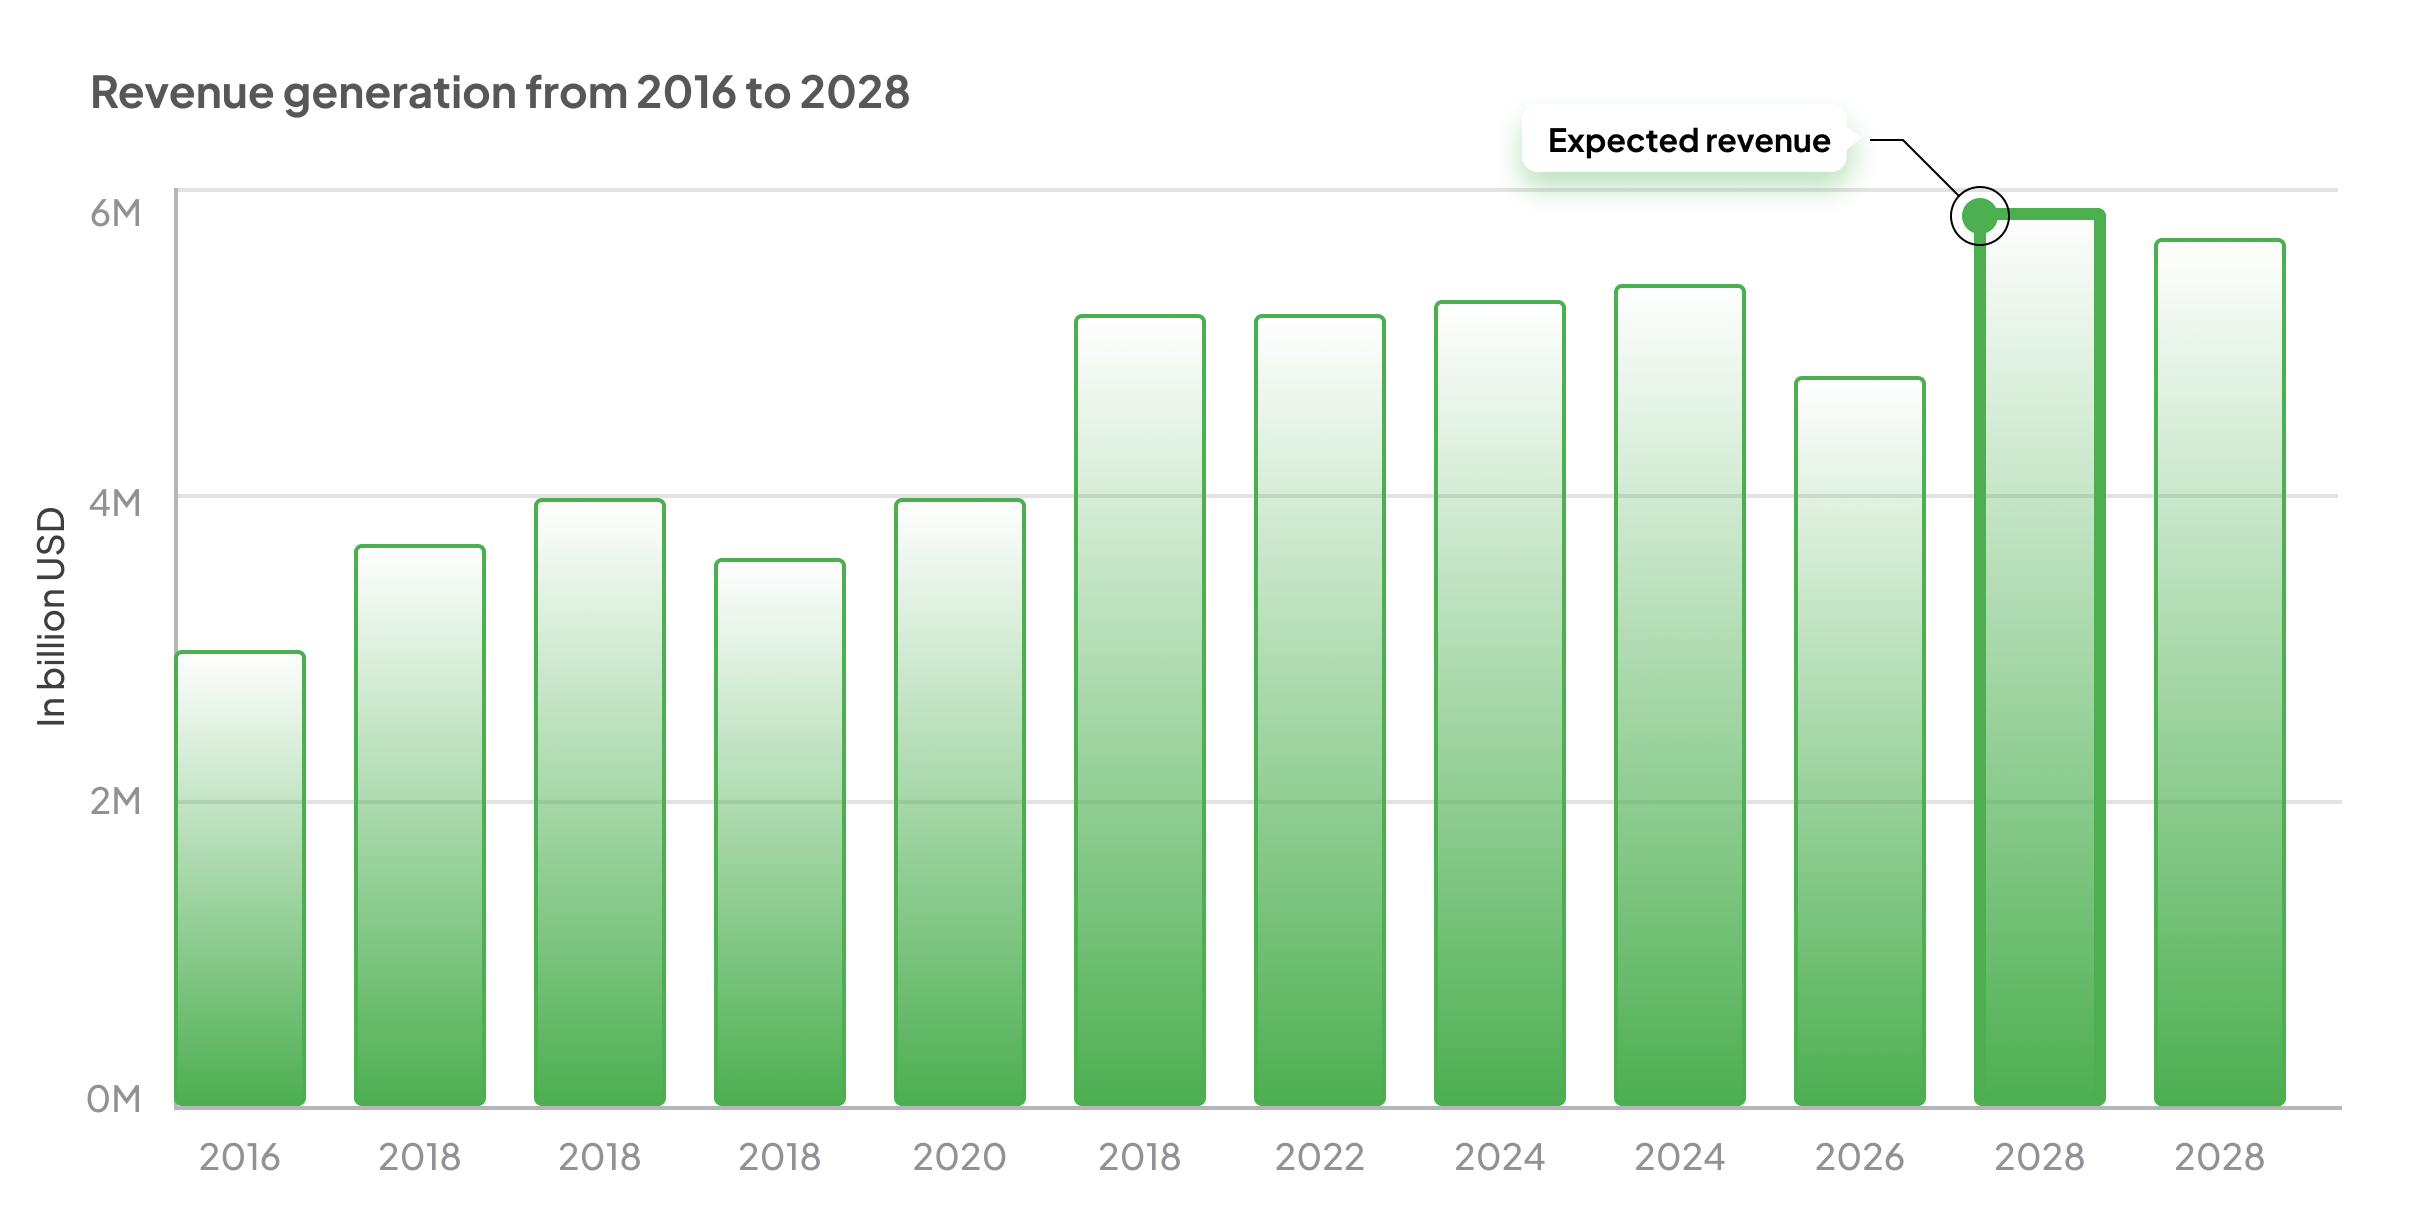 Revenue generation from 2016 to 2028